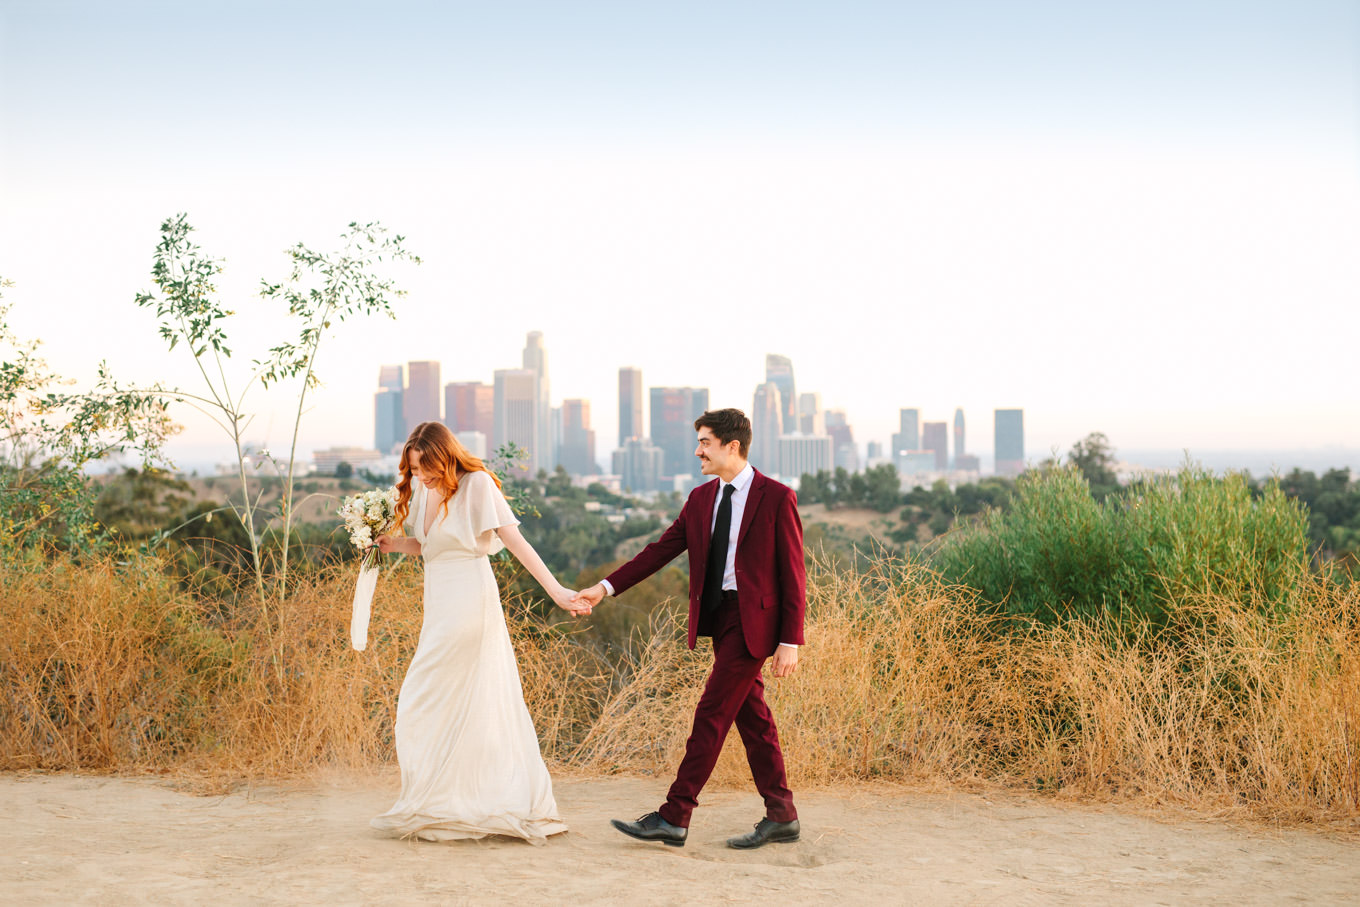 Los Angeles skyline elopement | Engagement, elopement, and wedding photography roundup of Mary Costa’s favorite images from 2020 | Colorful and elevated photography for fun-loving couples in Southern California | #2020wedding #elopement #weddingphoto #weddingphotography #microwedding   Source: Mary Costa Photography | Los Angeles